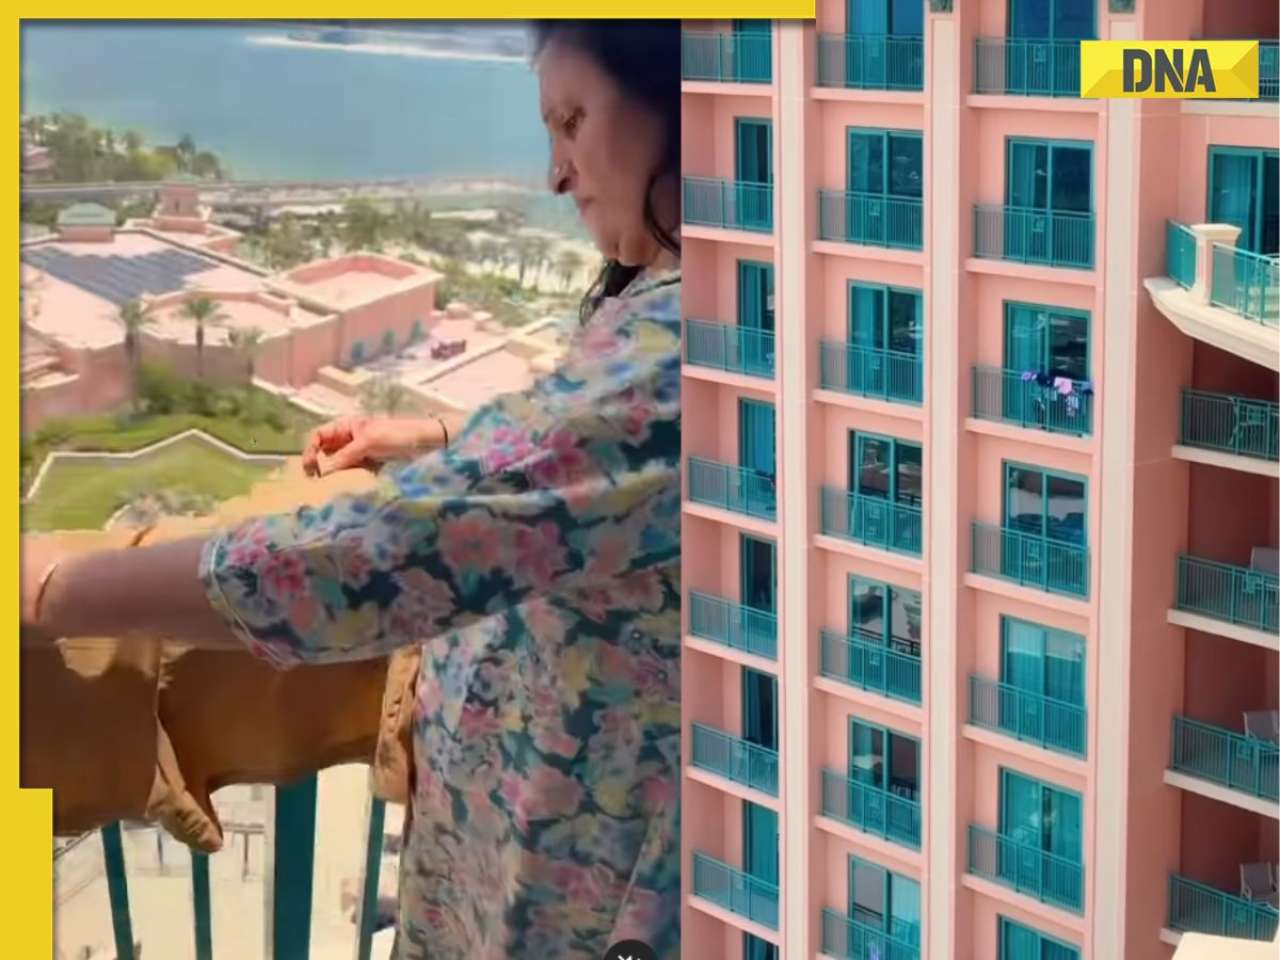 Watch viral video: Indian mom dries clothes on balcony of Dubai's Atlantis, The Palm; hotel reacts